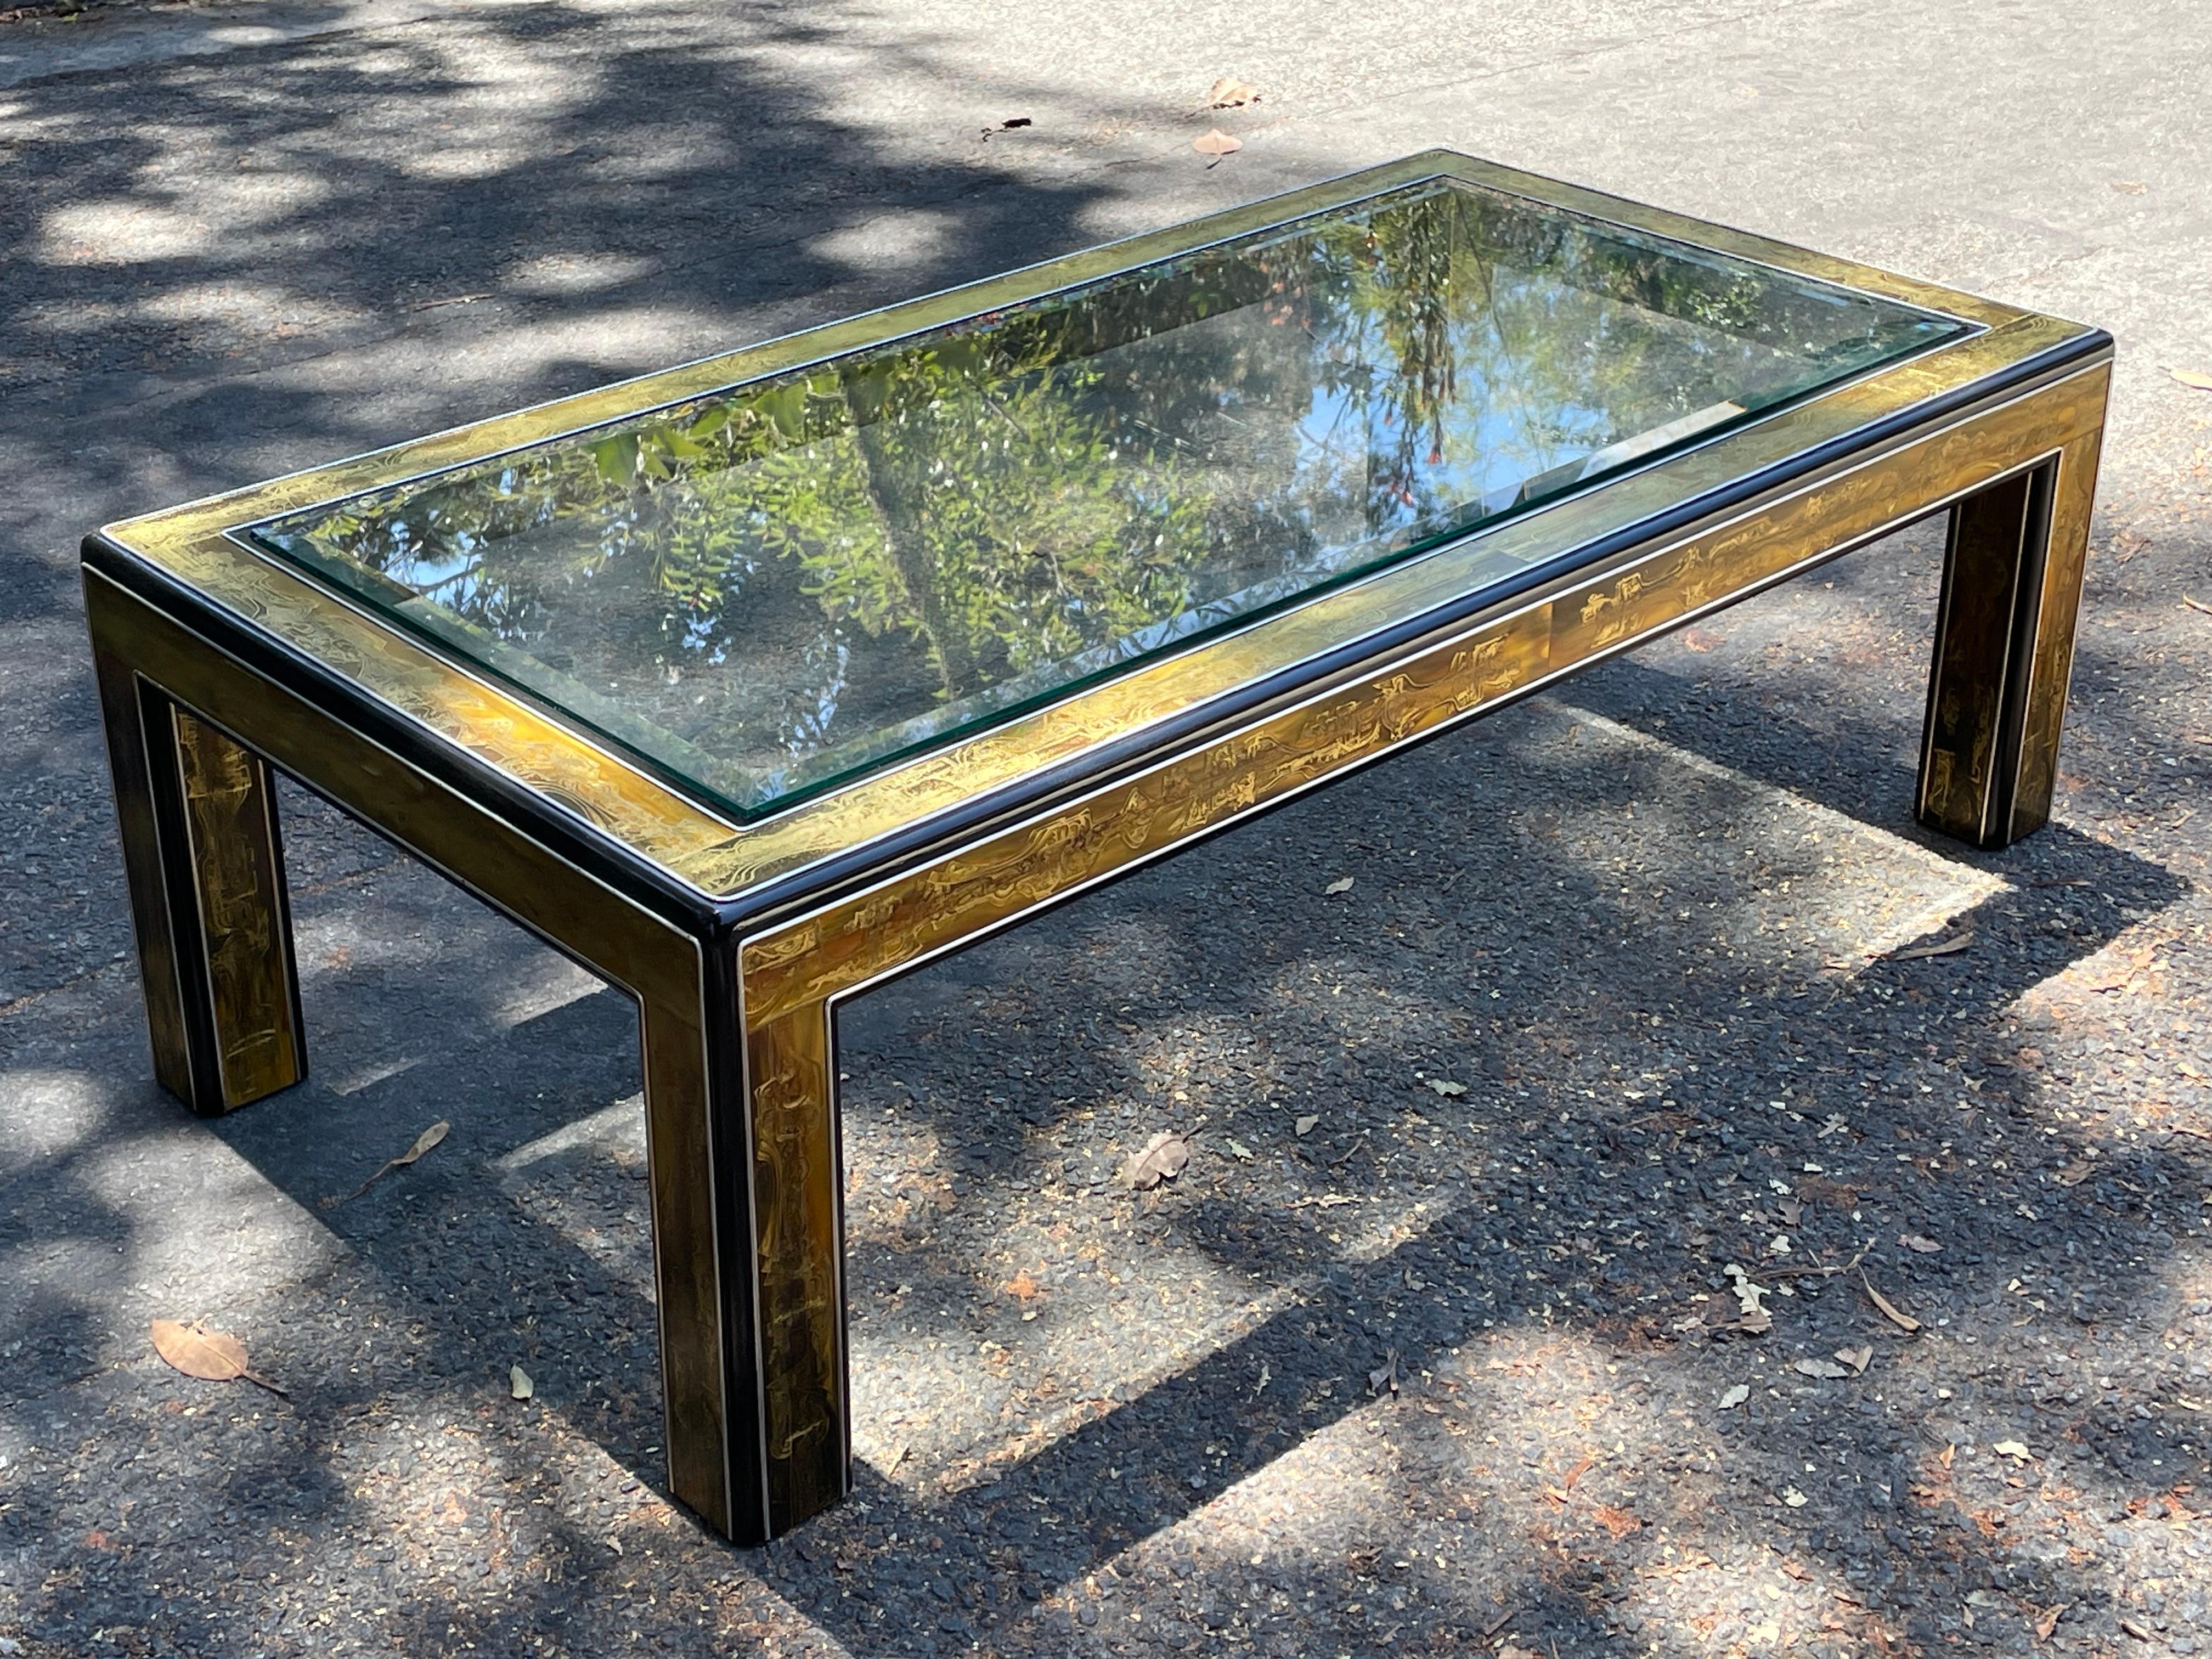 Stunning table by Mastercraft. Features Bernhard Rohne acid etched brass panels with a sleek rounded black lacquered edge.

The base is in very good vintage condition. As is the glass. Gorgeous table. 

We currently have this paired with Milo